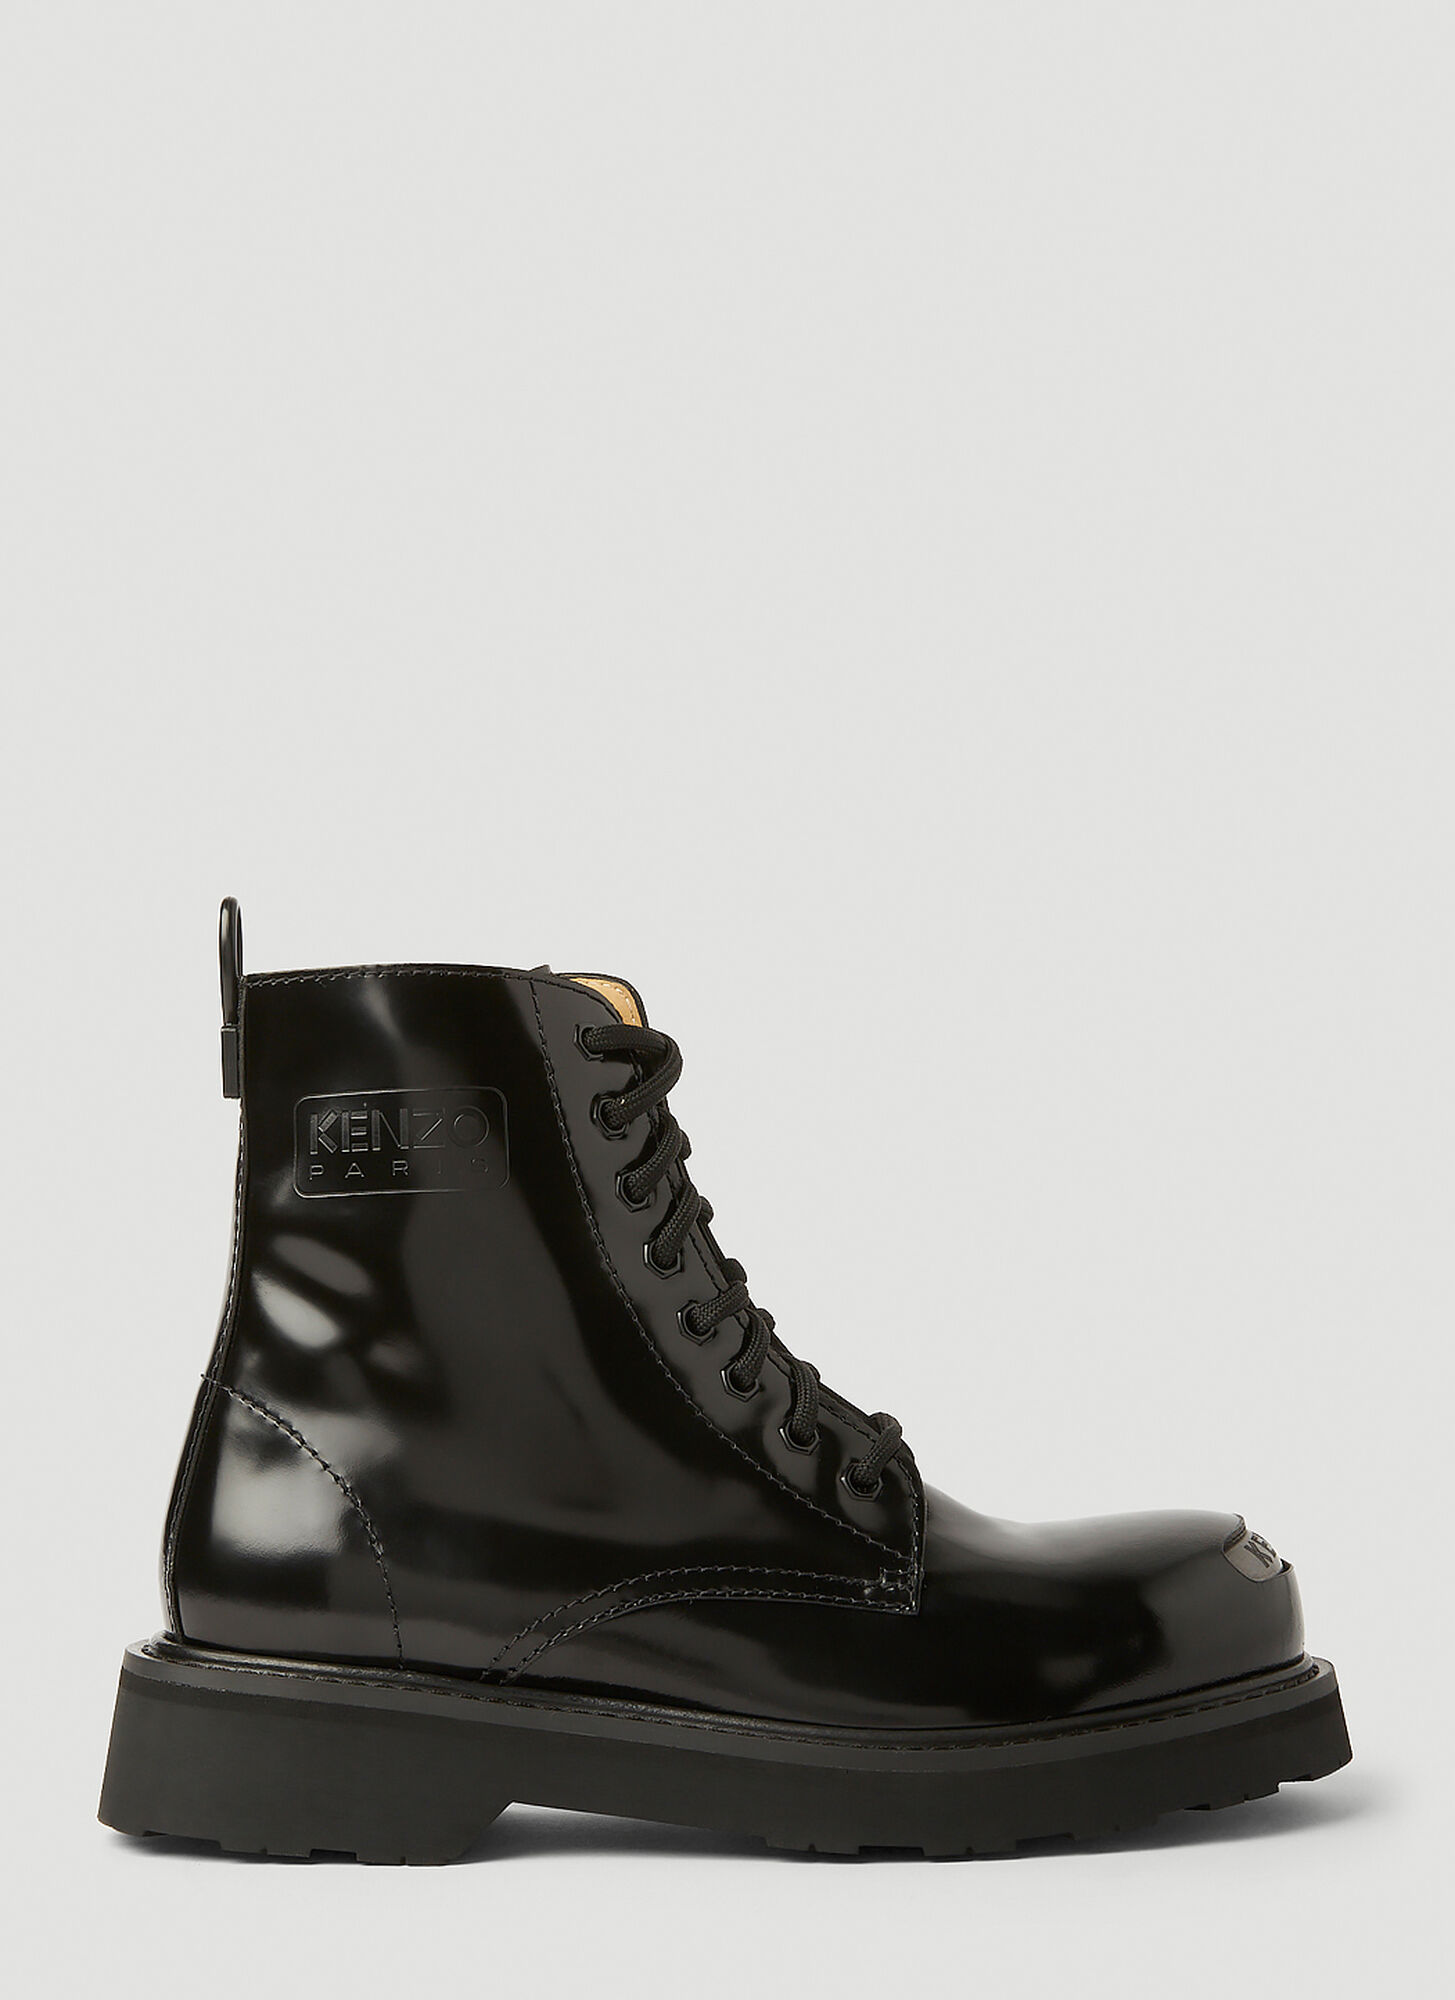 Kenzo Smile Lace Up Boots In Black